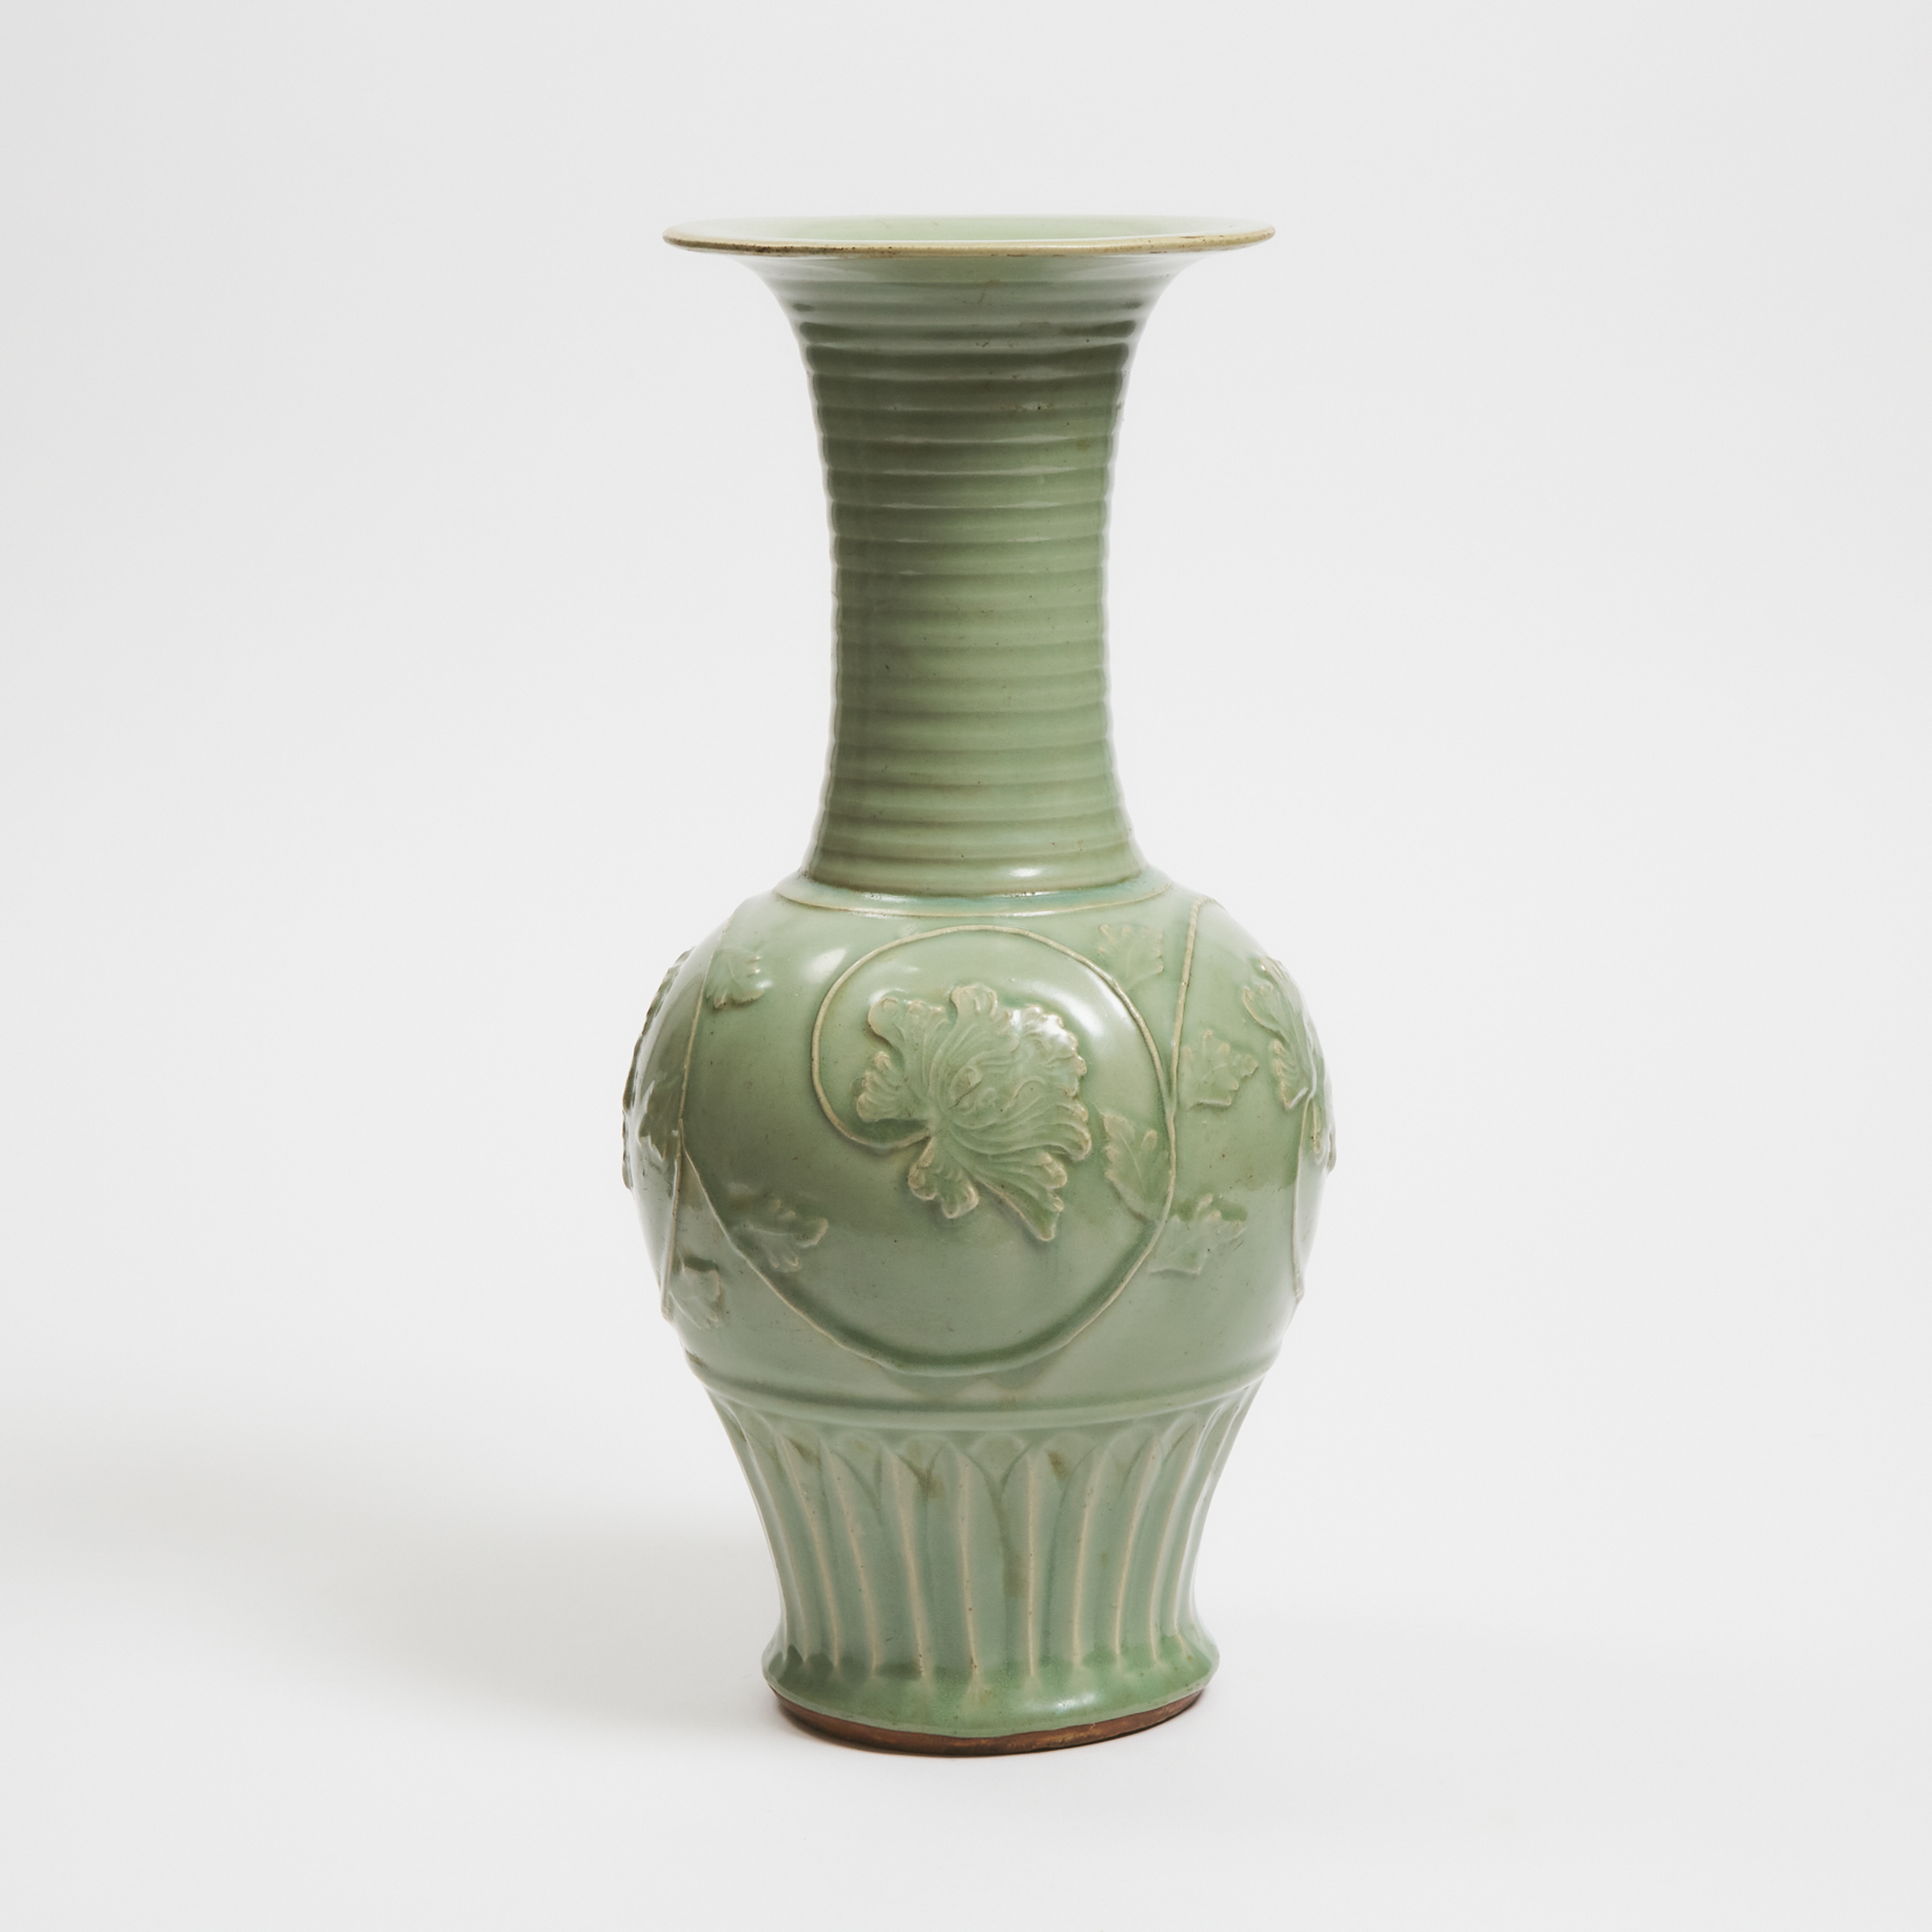 A Large Carved and Moulded Longquan Celadon 'Phoenix-Tail' Temple Vase, Yuan Dynasty, 14th Century